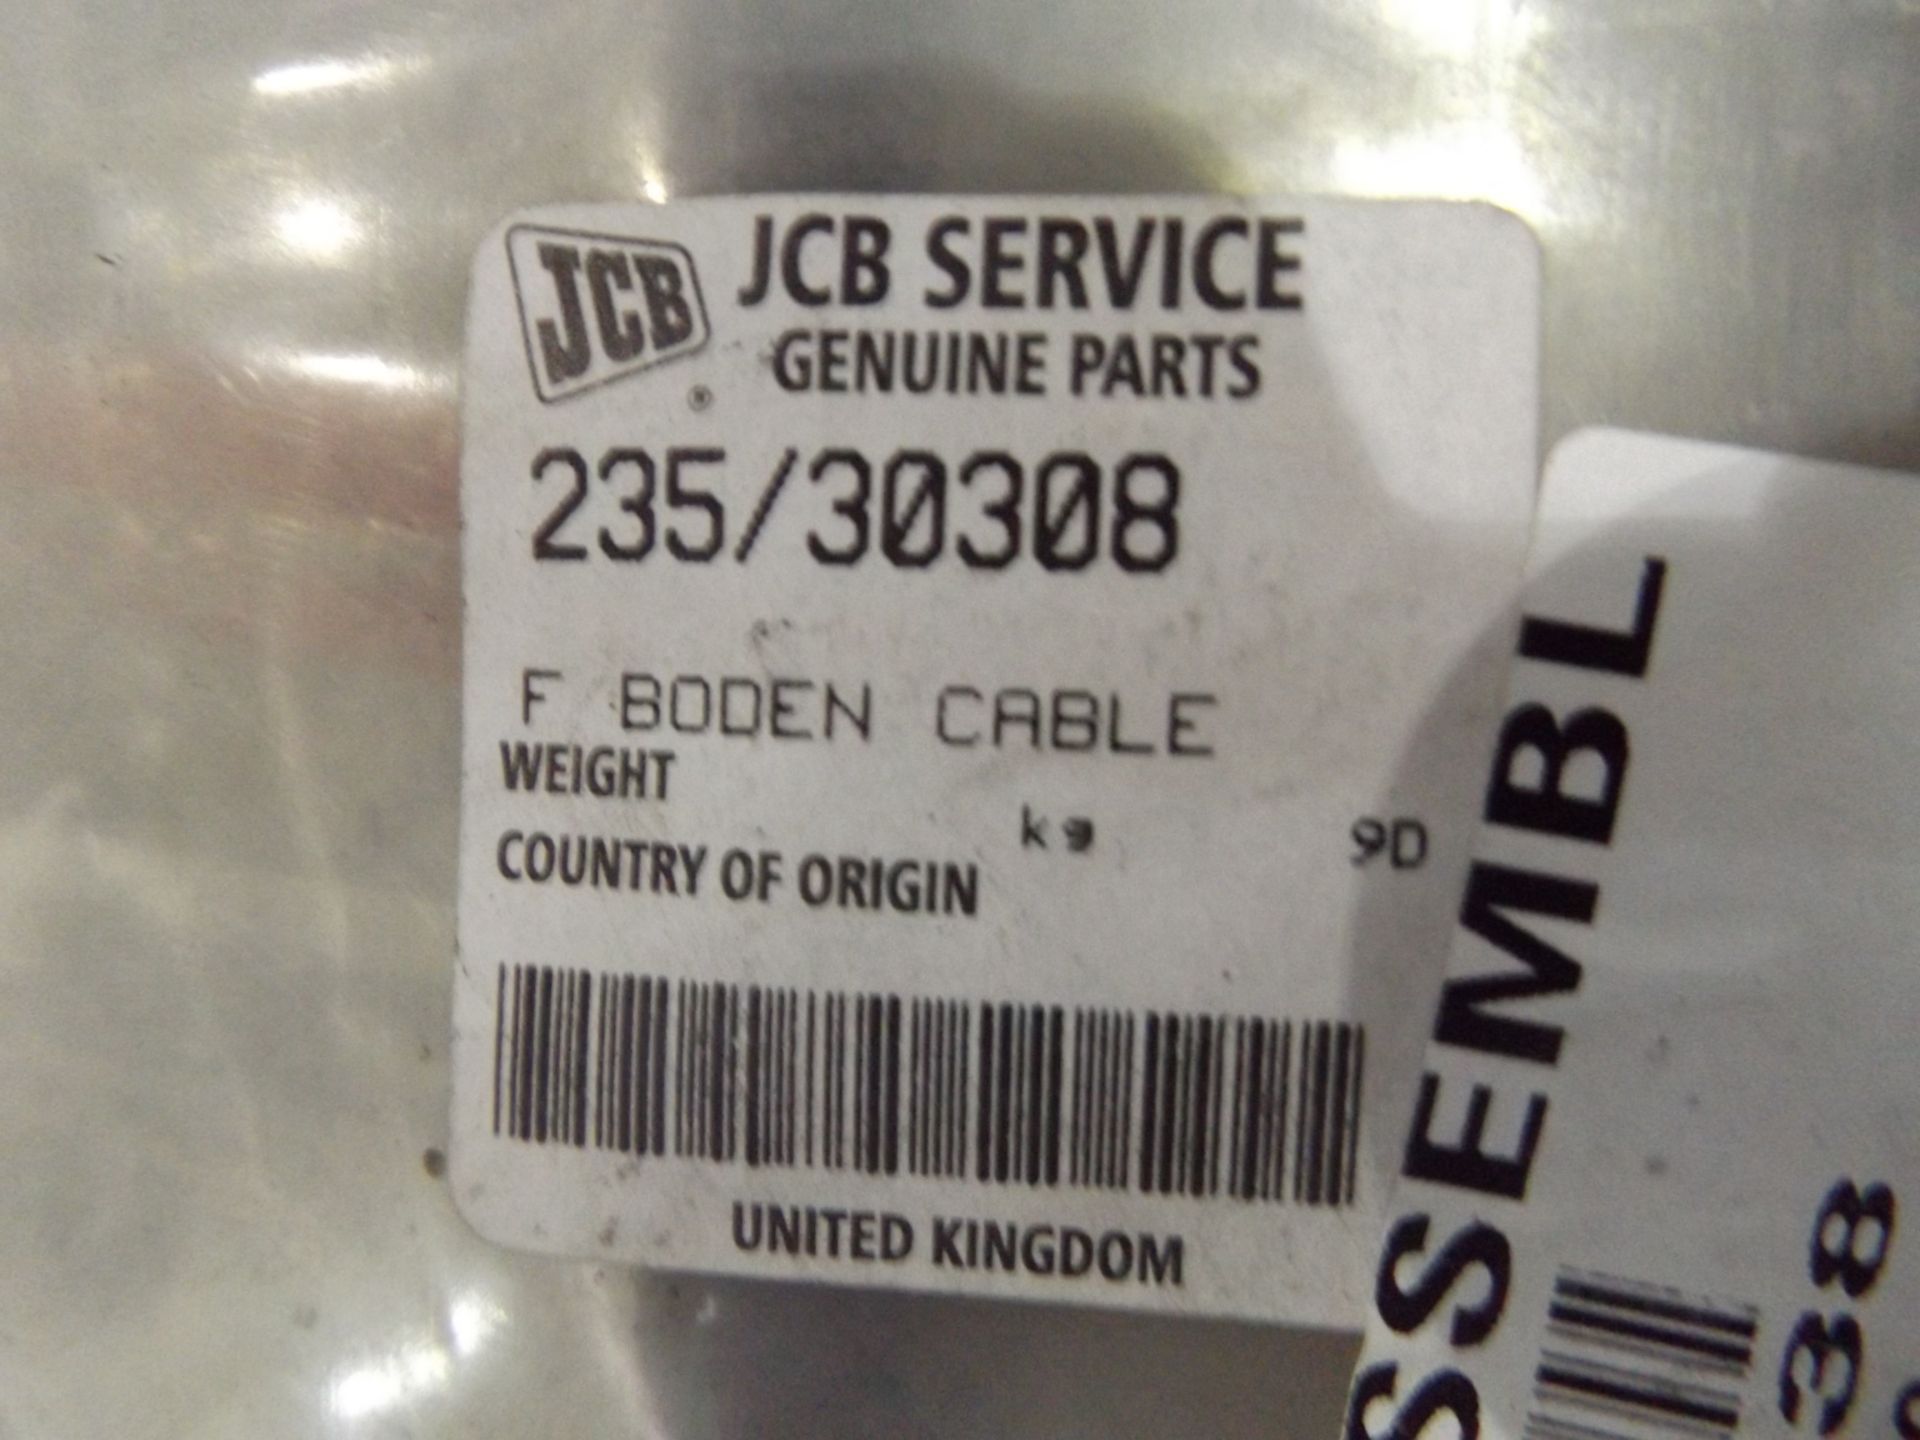 14 x JCB Push Pull Control Cable Assys P/No 235/30308 - Image 6 of 6